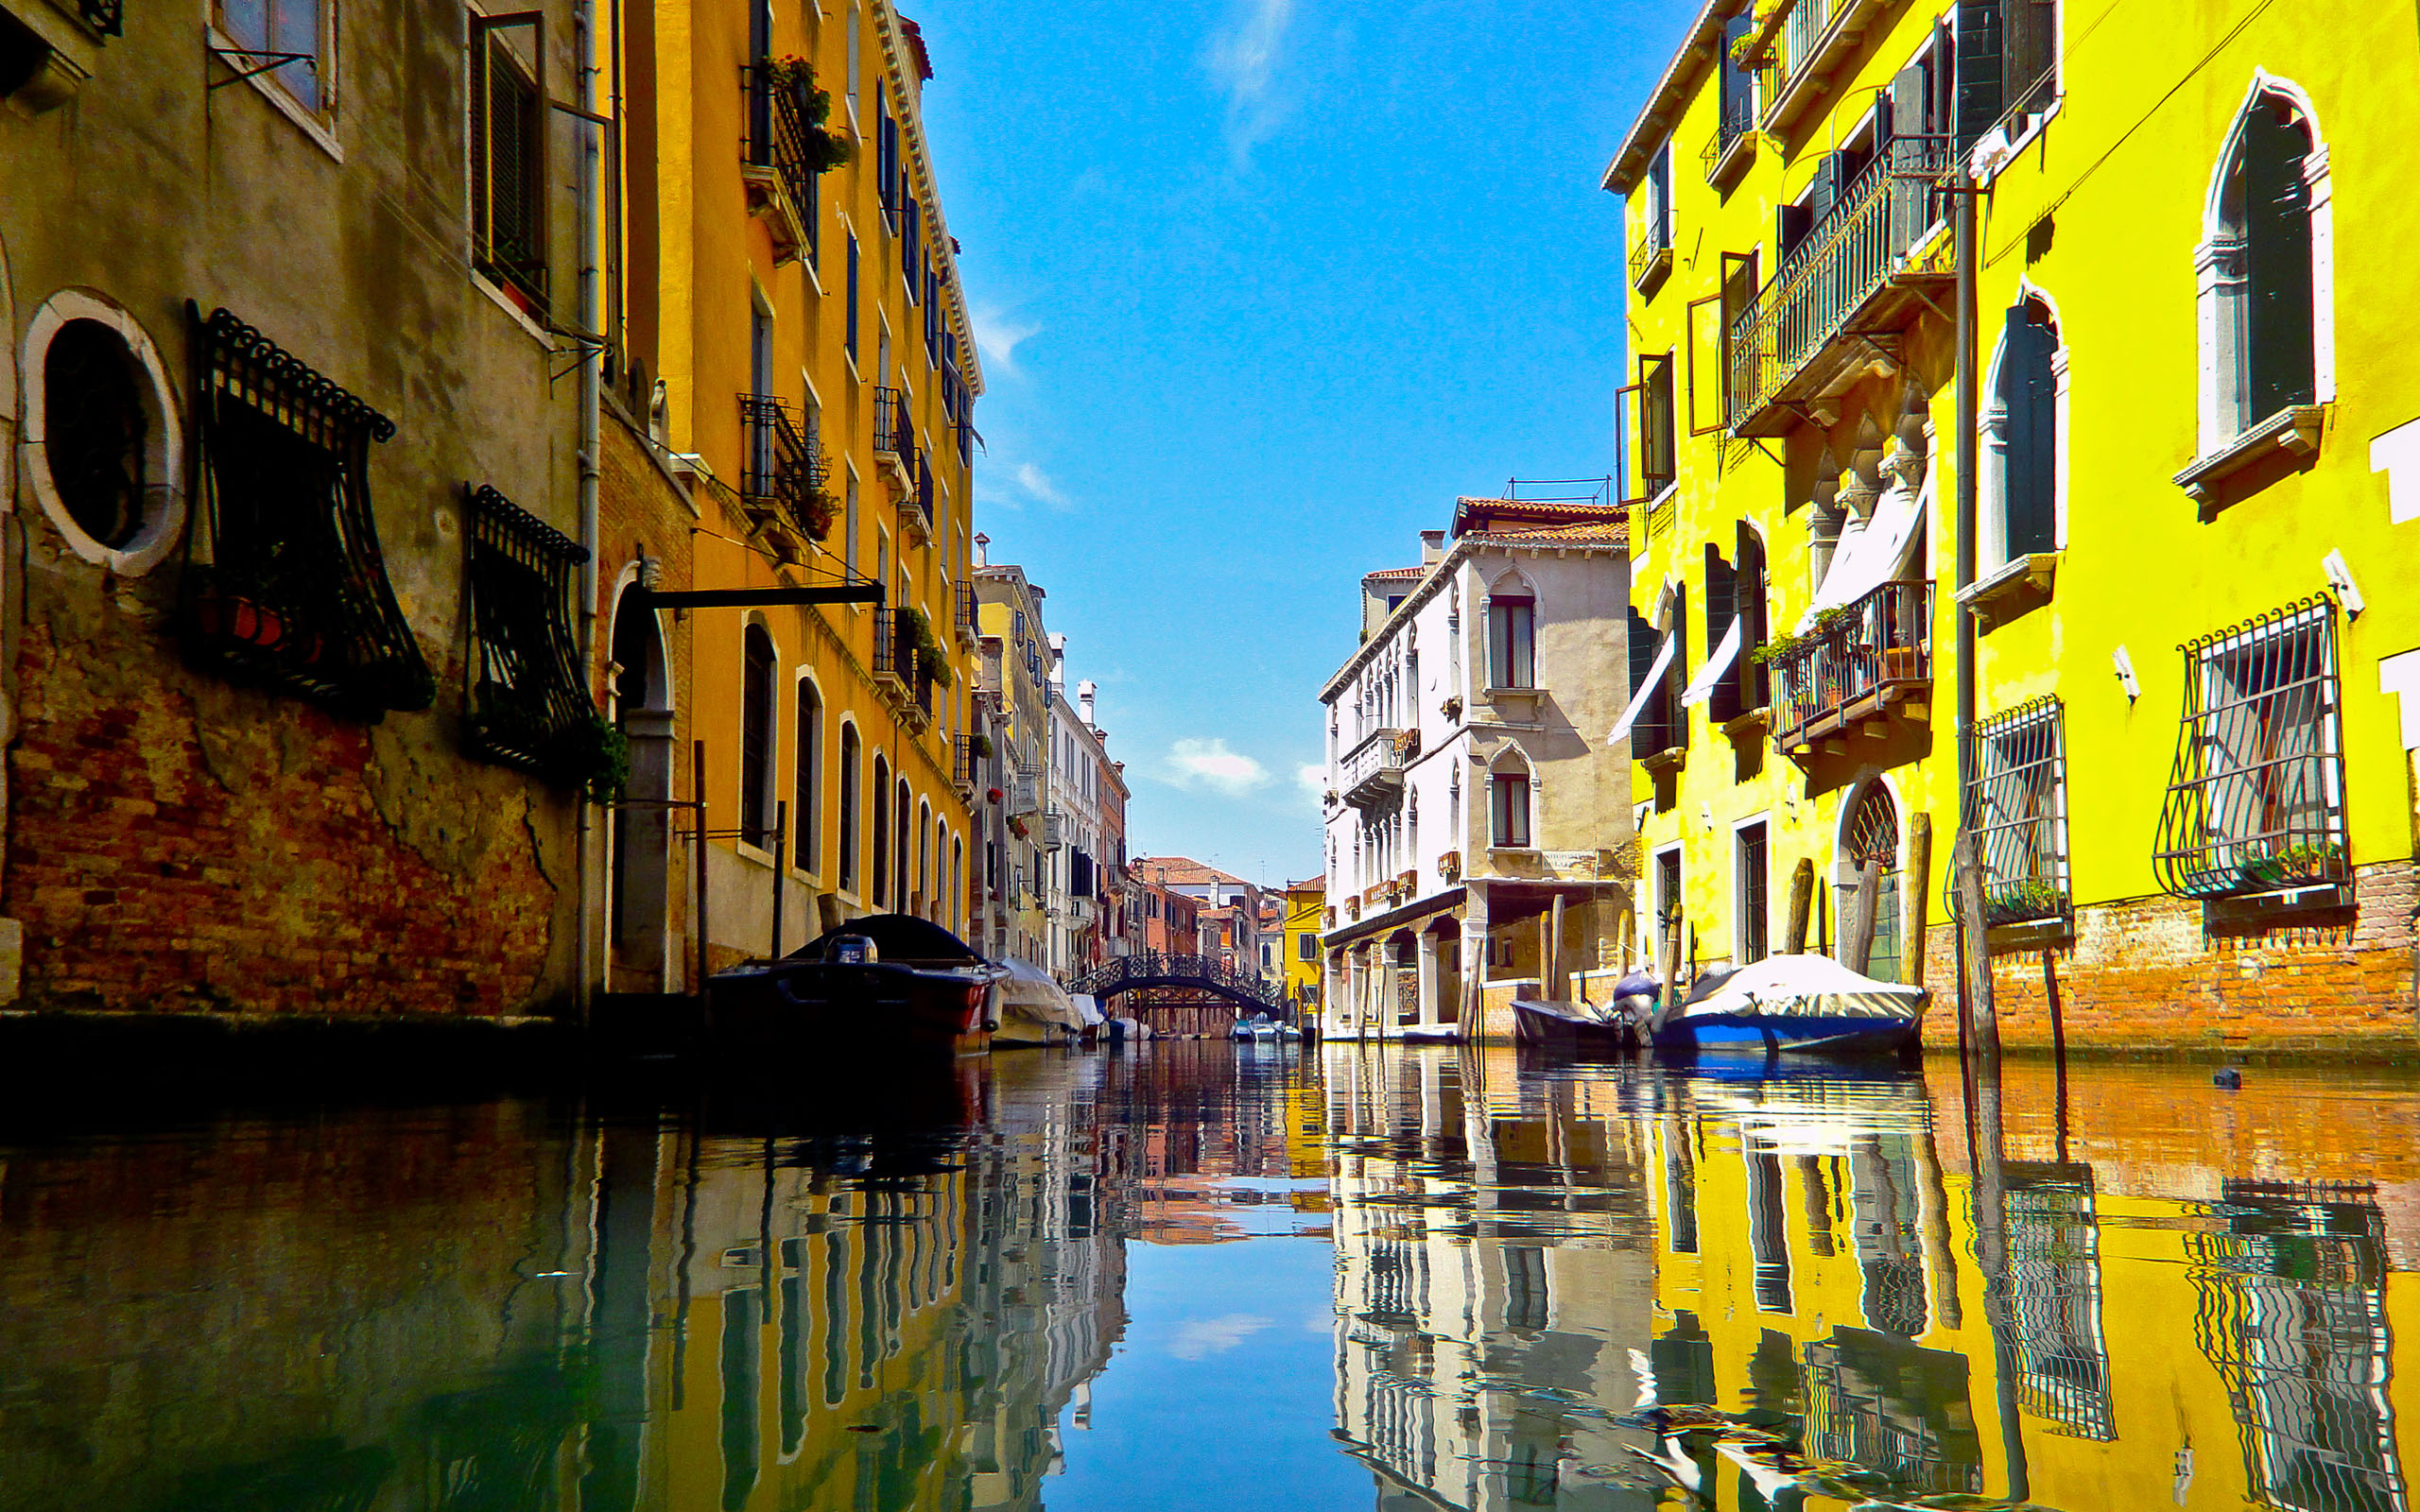 As a canal with buildings on either side - Italy